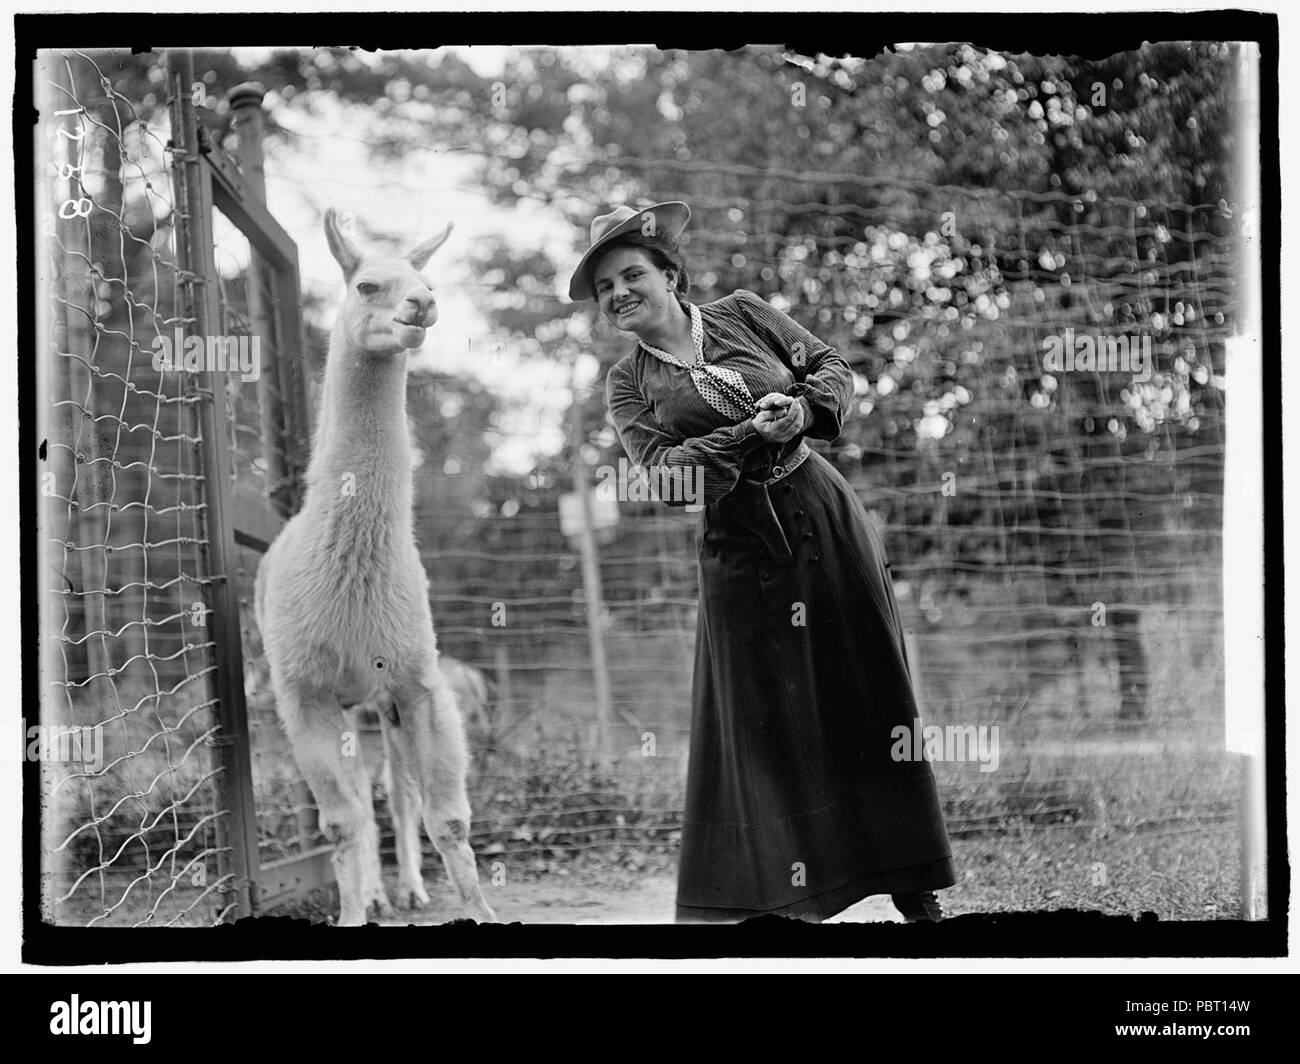 ADAMS, MRS. FRANKLIN, NEE HARRIET CHALMERS. AT ZOO WITH LLAMA Stock Photo